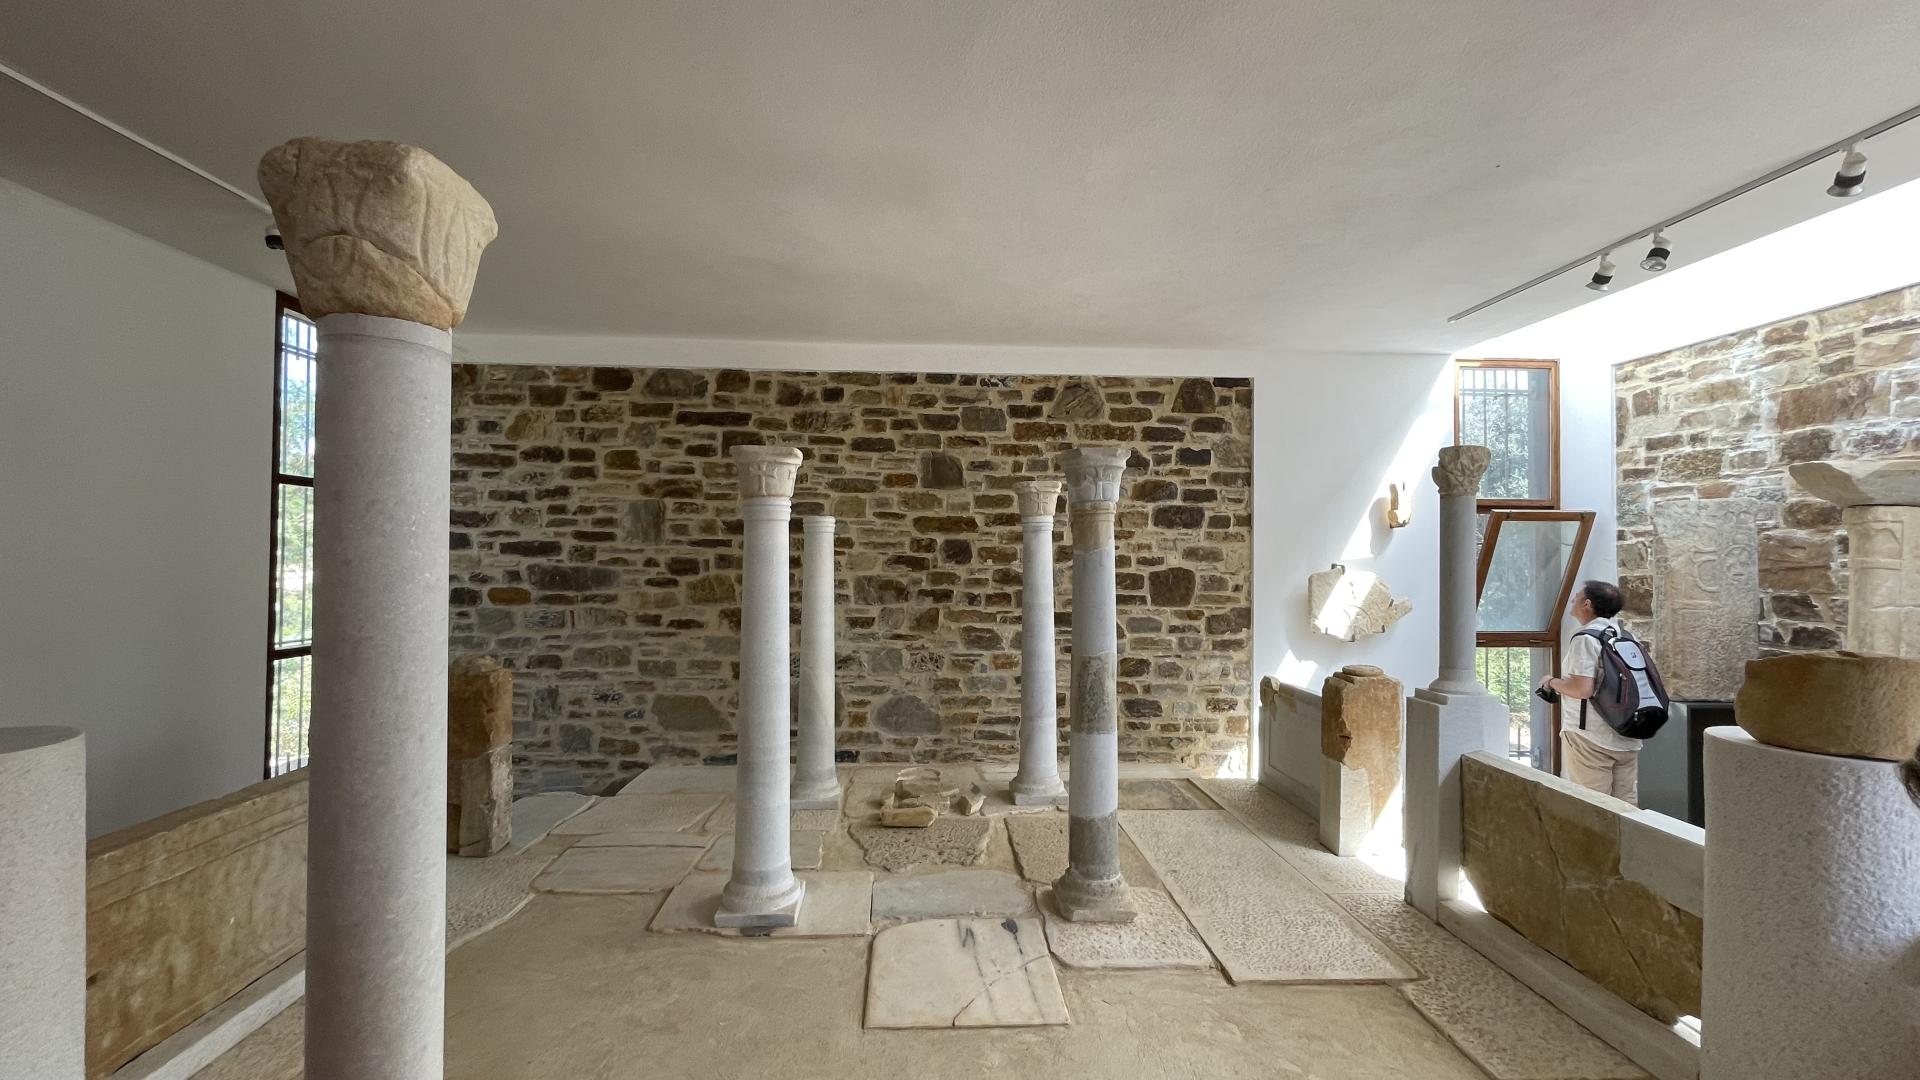 The Temple of Demeter Museum on Naxos